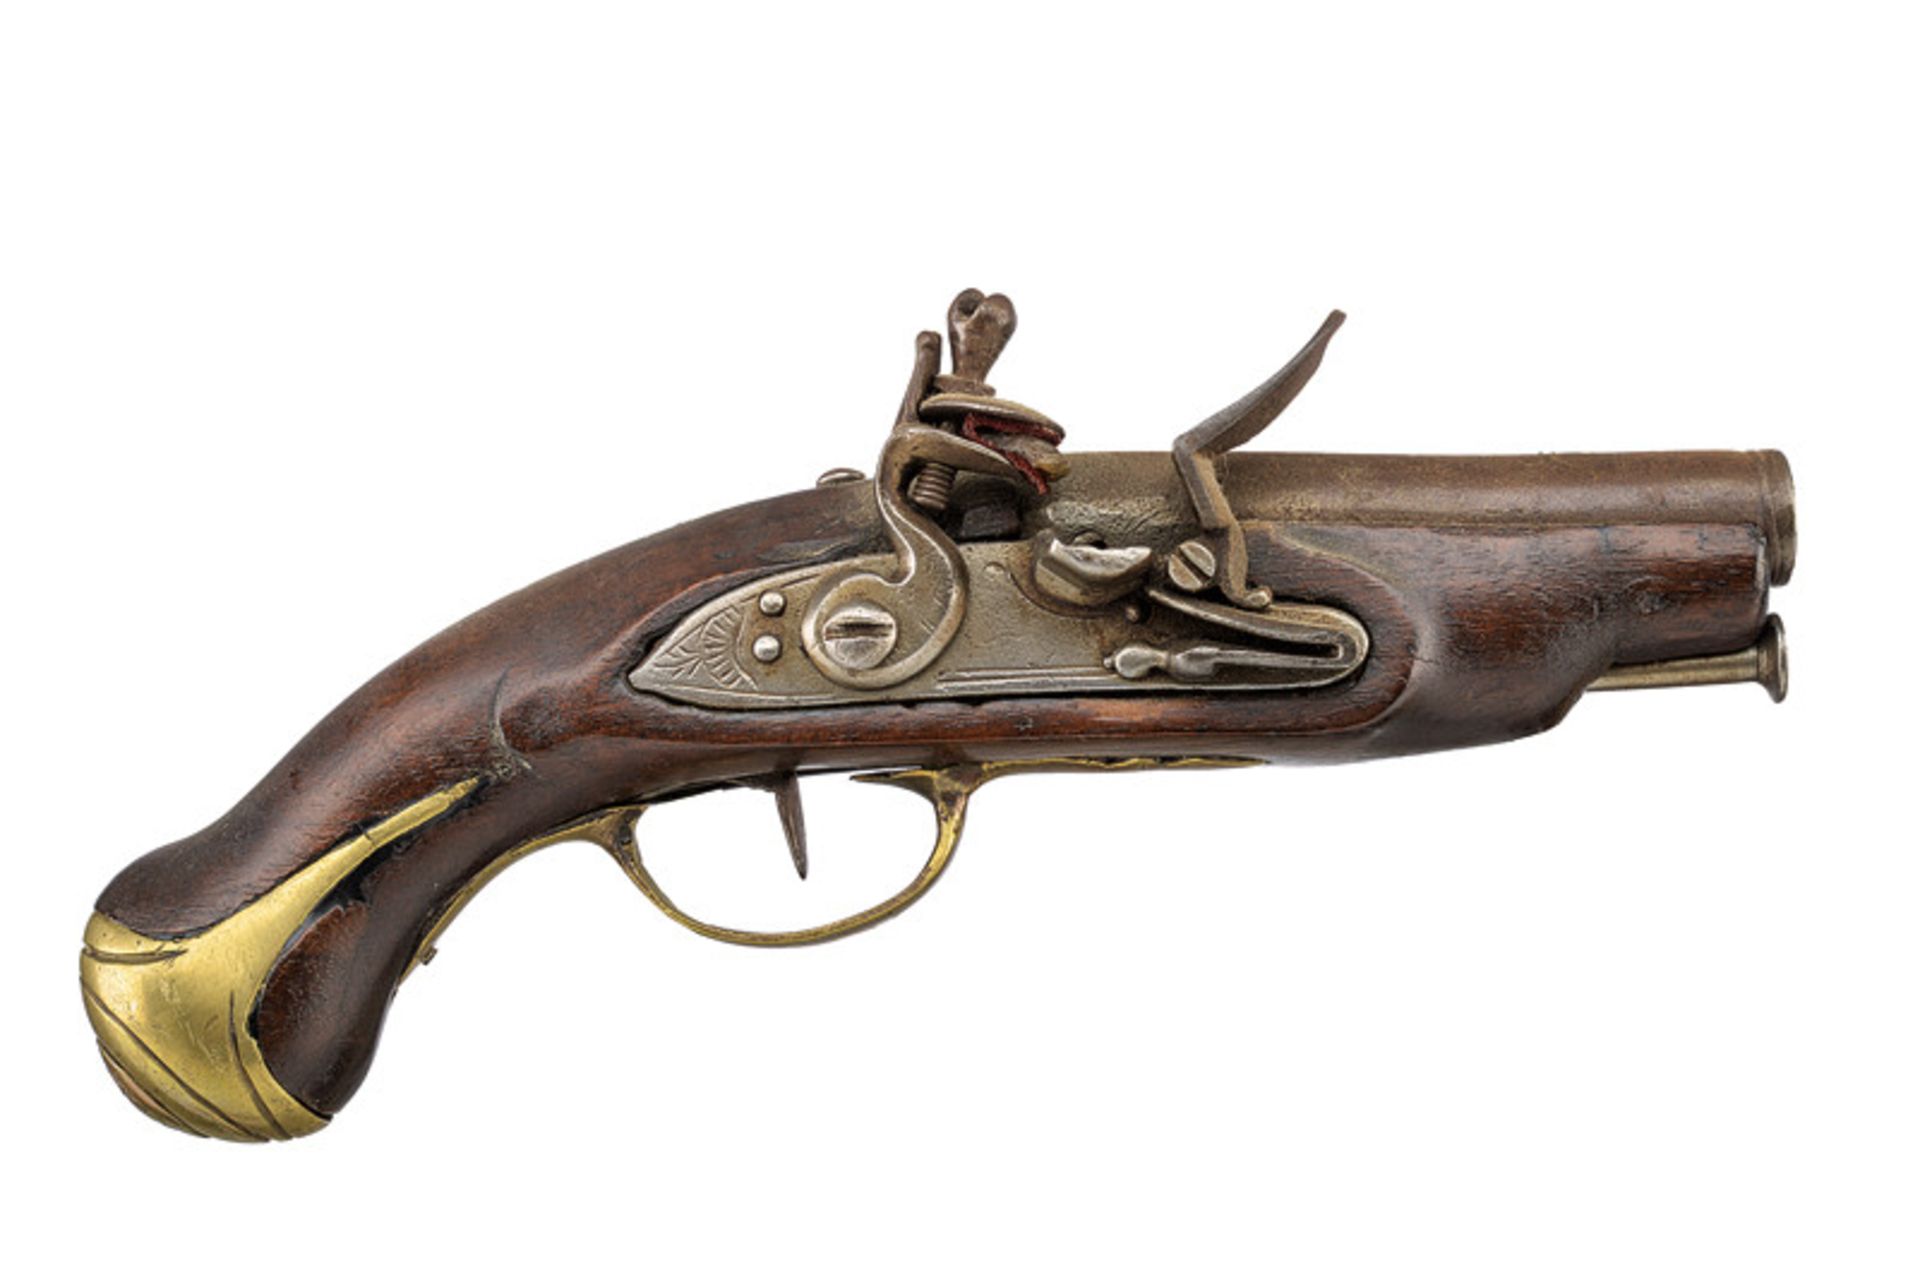 A flintlock traveling pistol dating: early 19th Century provenance: Italy Smooth, round, 11 mm